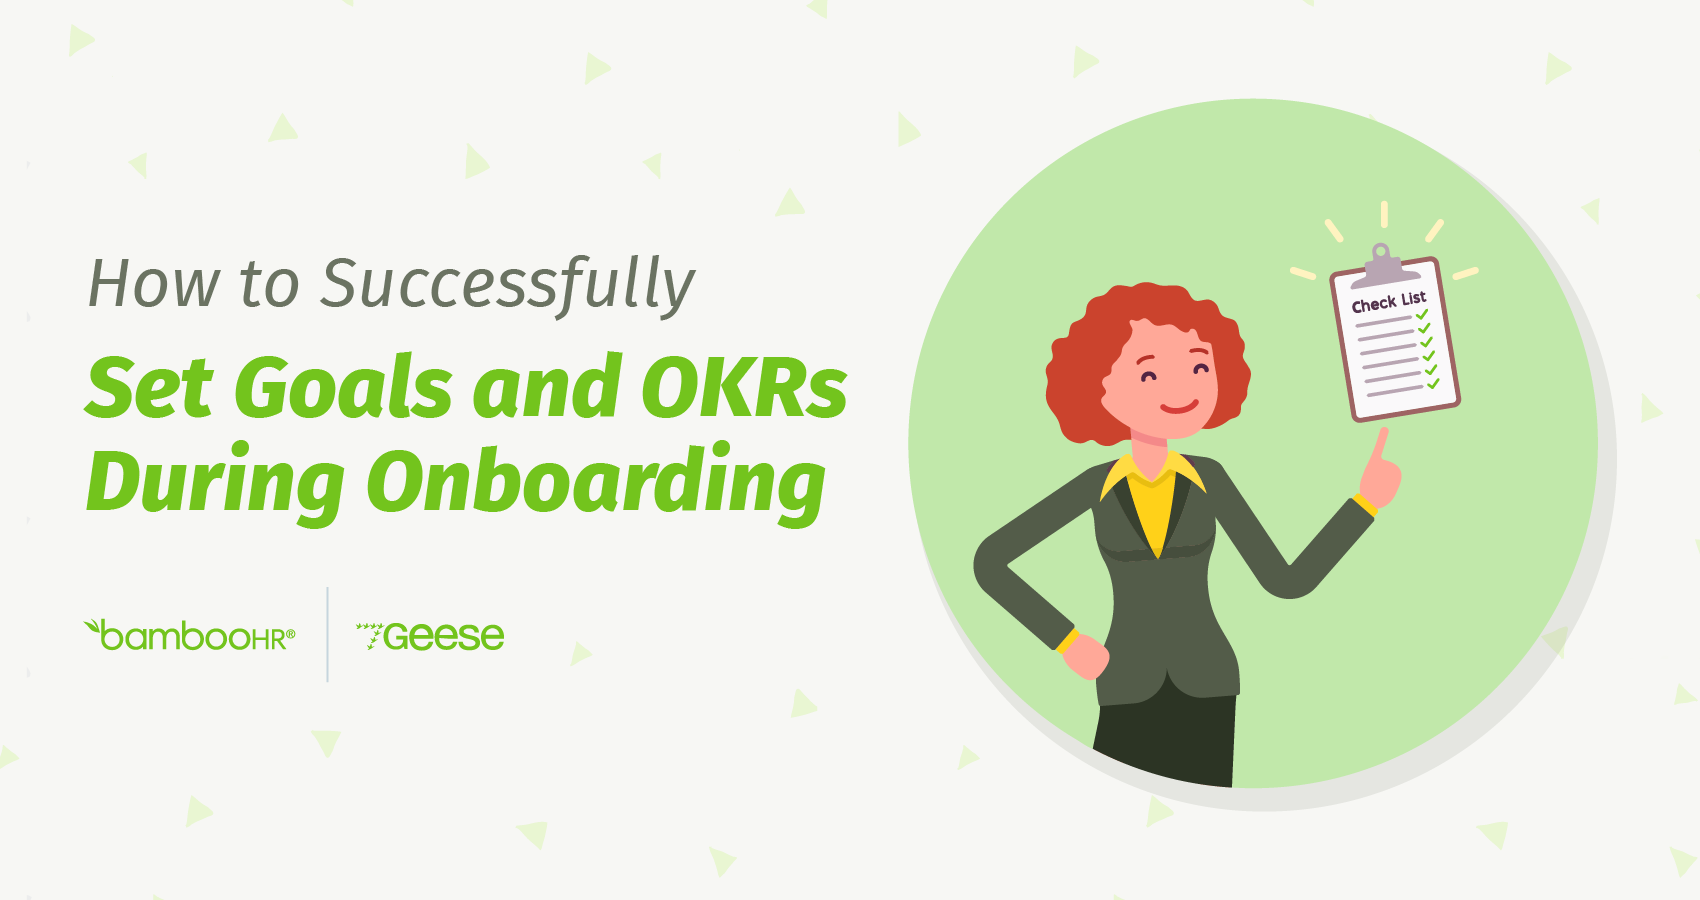 How to Successfully Set Goals and OKRs During Onboarding